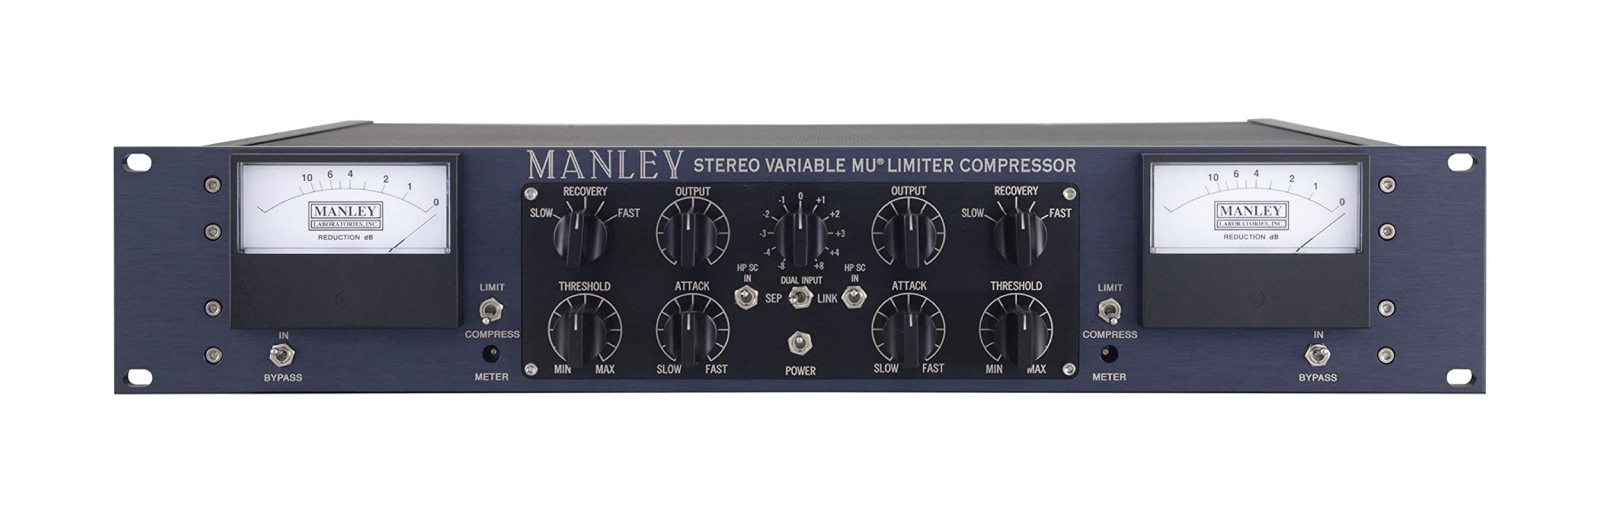 MANLEY VARIABLE MU MASTERING THE WORKS